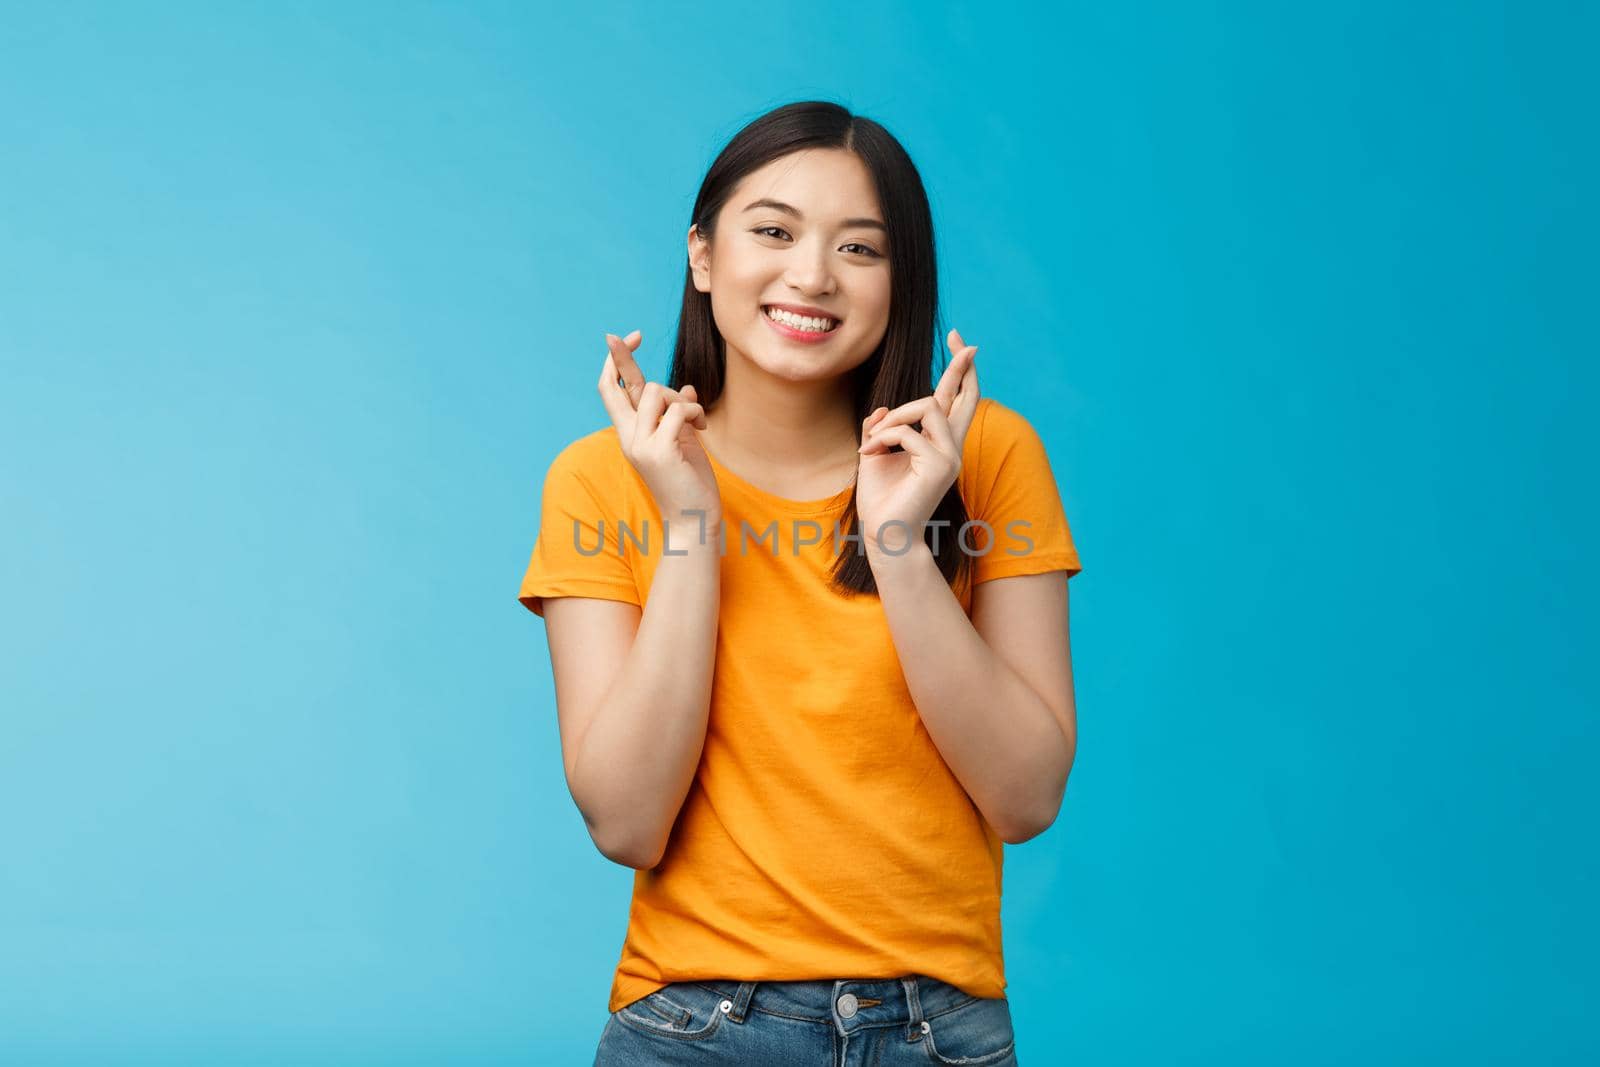 Cheerful smiling hopeful asian girl praying wish for good luck, cross fingers grinning toothy anticipate positive good news, stand blue background supplicating optimistic feelings hope win.